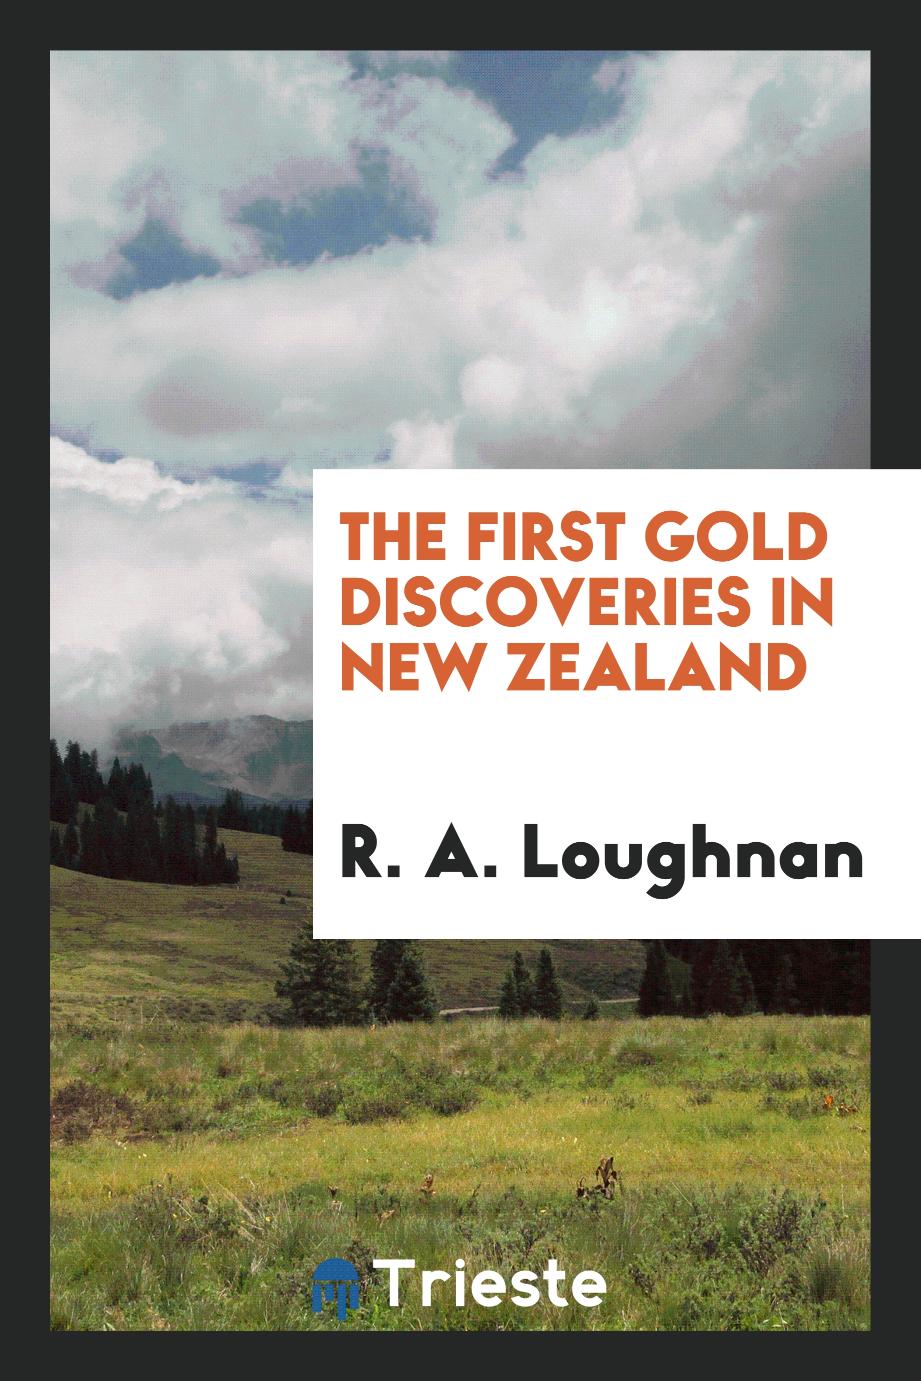 The First Gold Discoveries in New Zealand